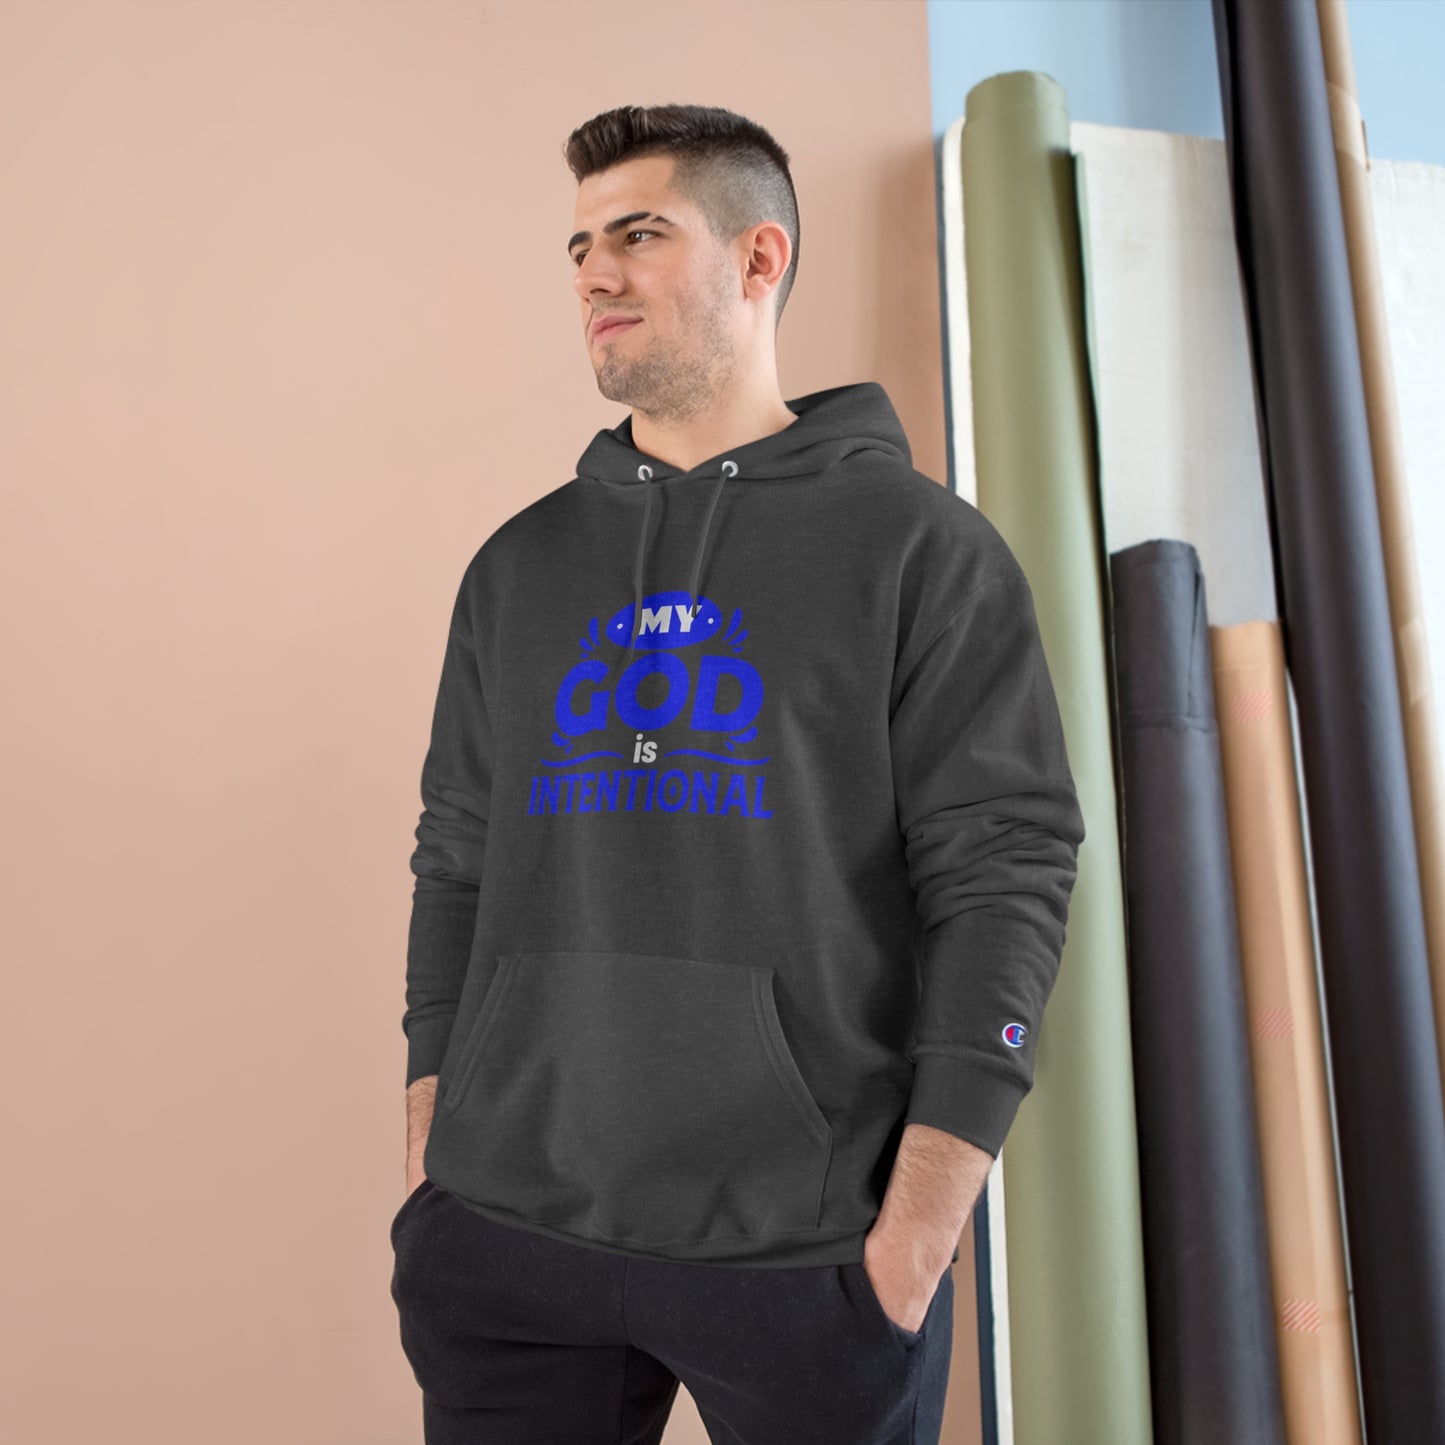 My God Is Intentional Unisex Champion Hoodie